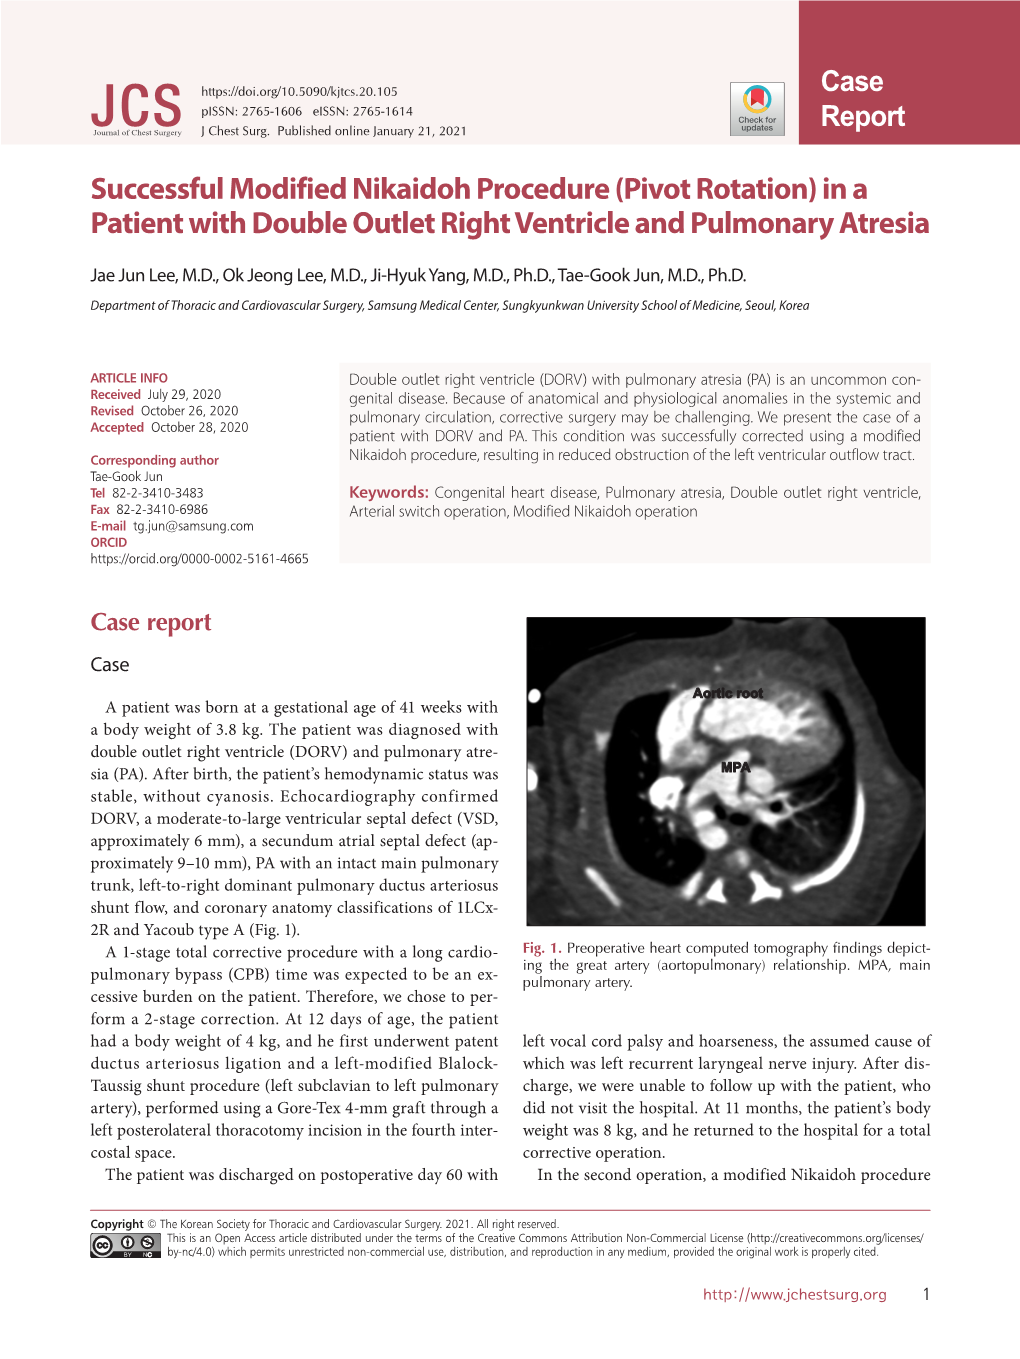 Successful Modified Nikaidoh Procedure (Pivot Rotation) in a Patient with Double Outlet Right Ventricle and Pulmonary Atresia